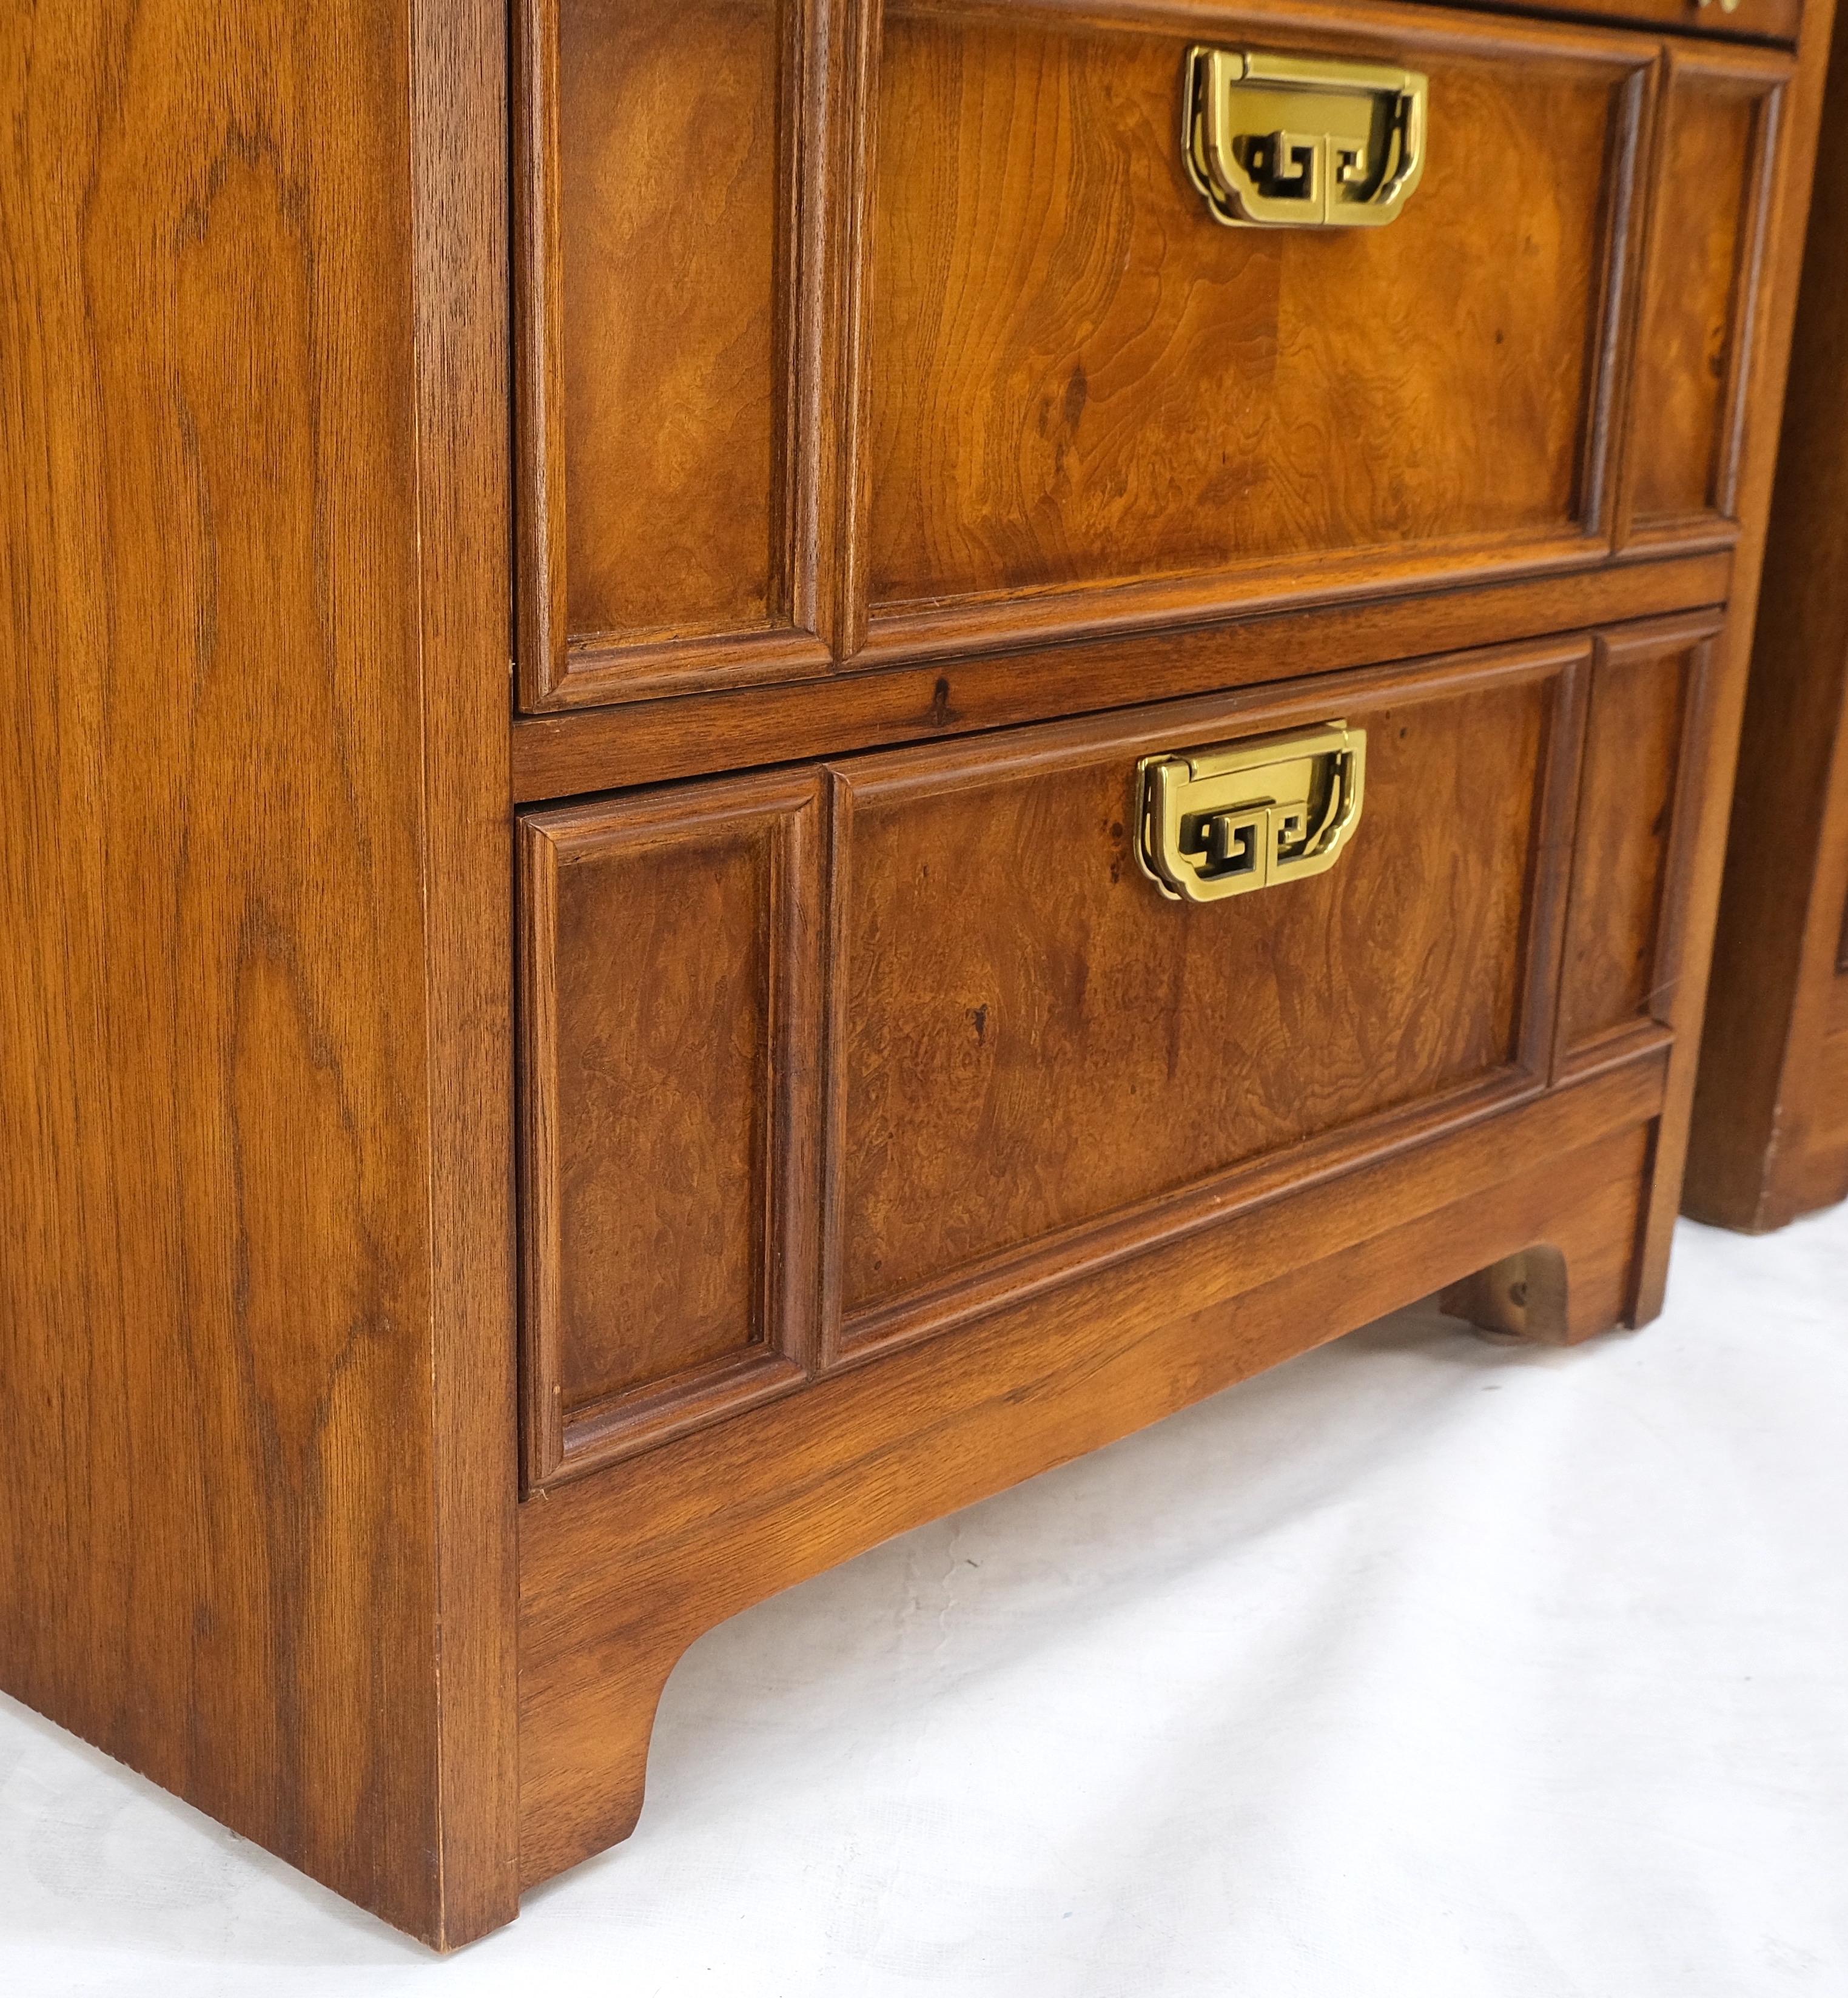 Lacquered Thomasville Tall Tower Shape Highboy Dressers W/ Drawer Compartment Burl Wood 